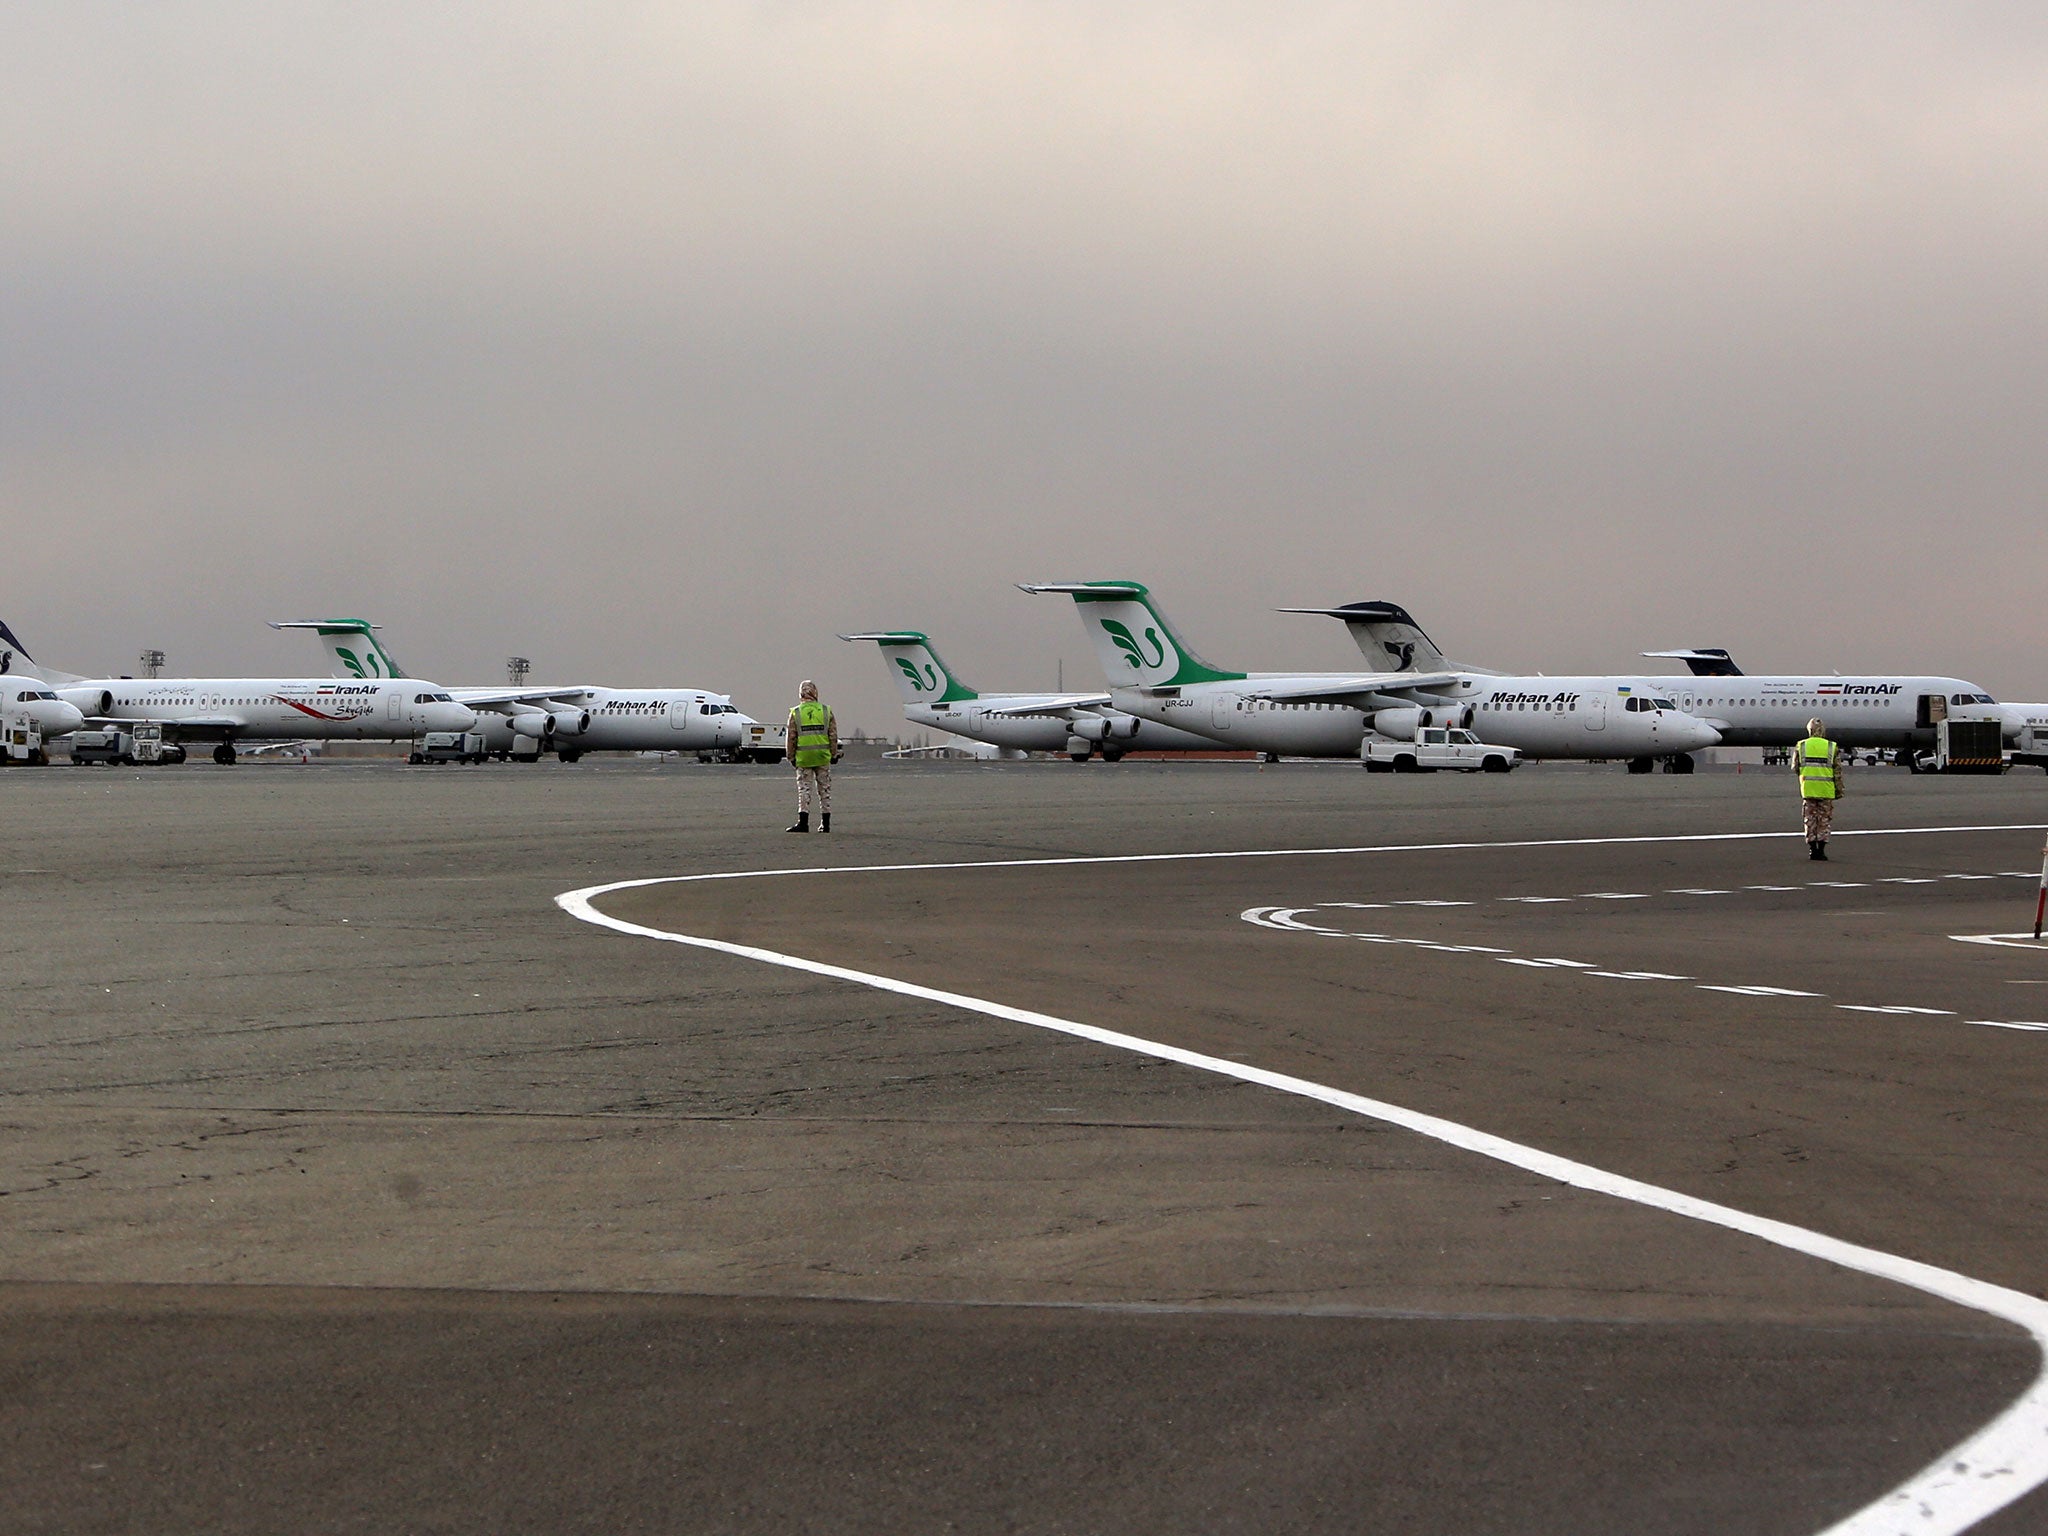 Iran Air and Mahan Air passenger planes sit on the tarmac of the domestic Mehrabad airport in the Iranian capital Tehran